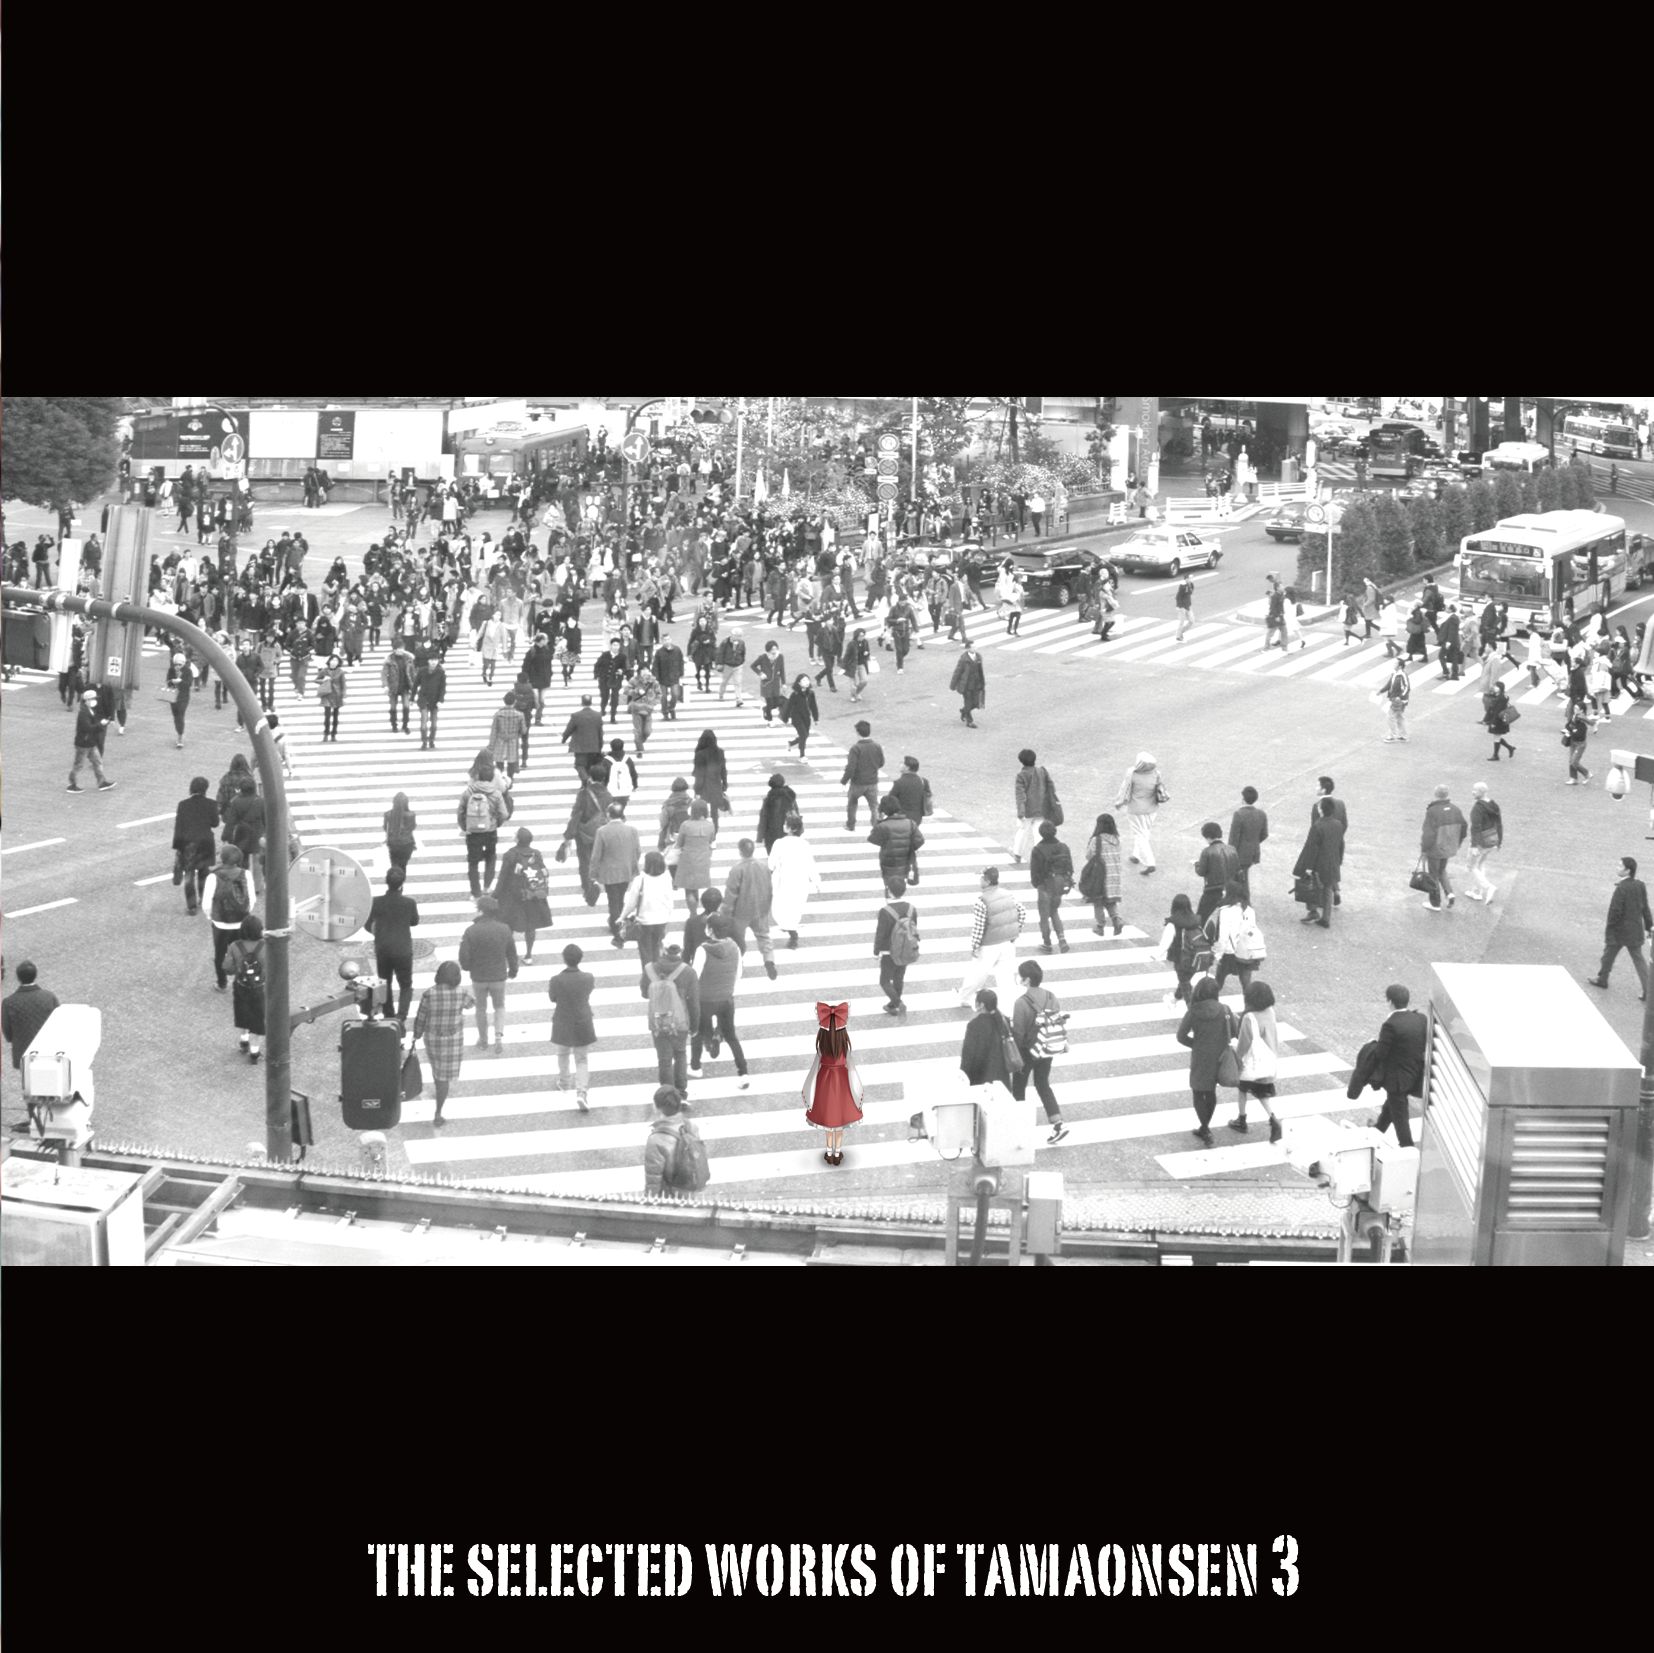 THE SELECTED WORKS OF TAMAONSEN 3